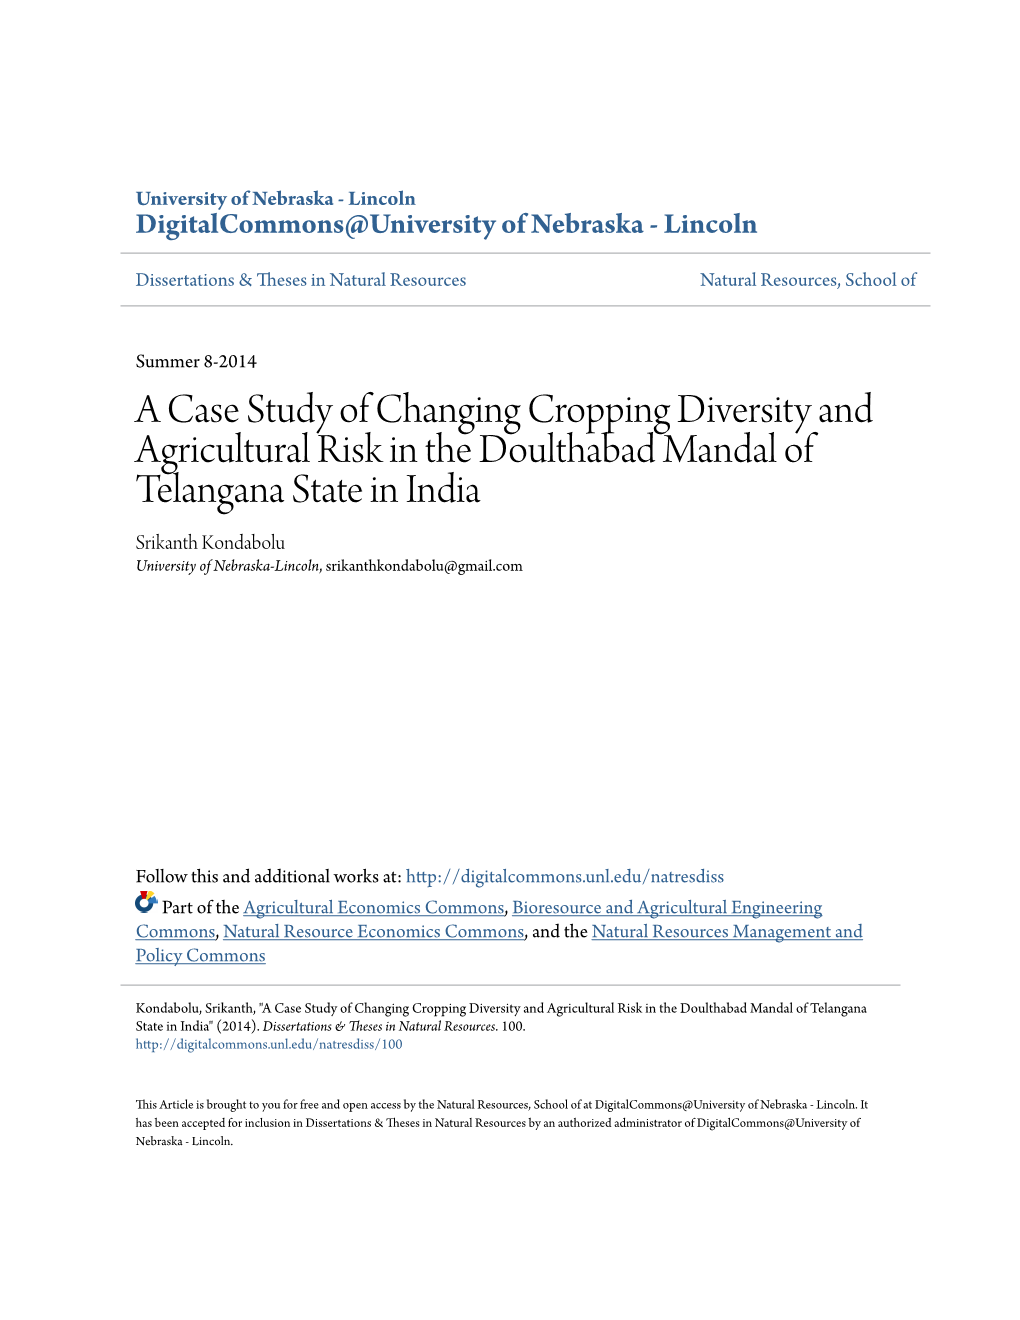 A Case Study of Changing Cropping Diversity and Agricultural Risk In